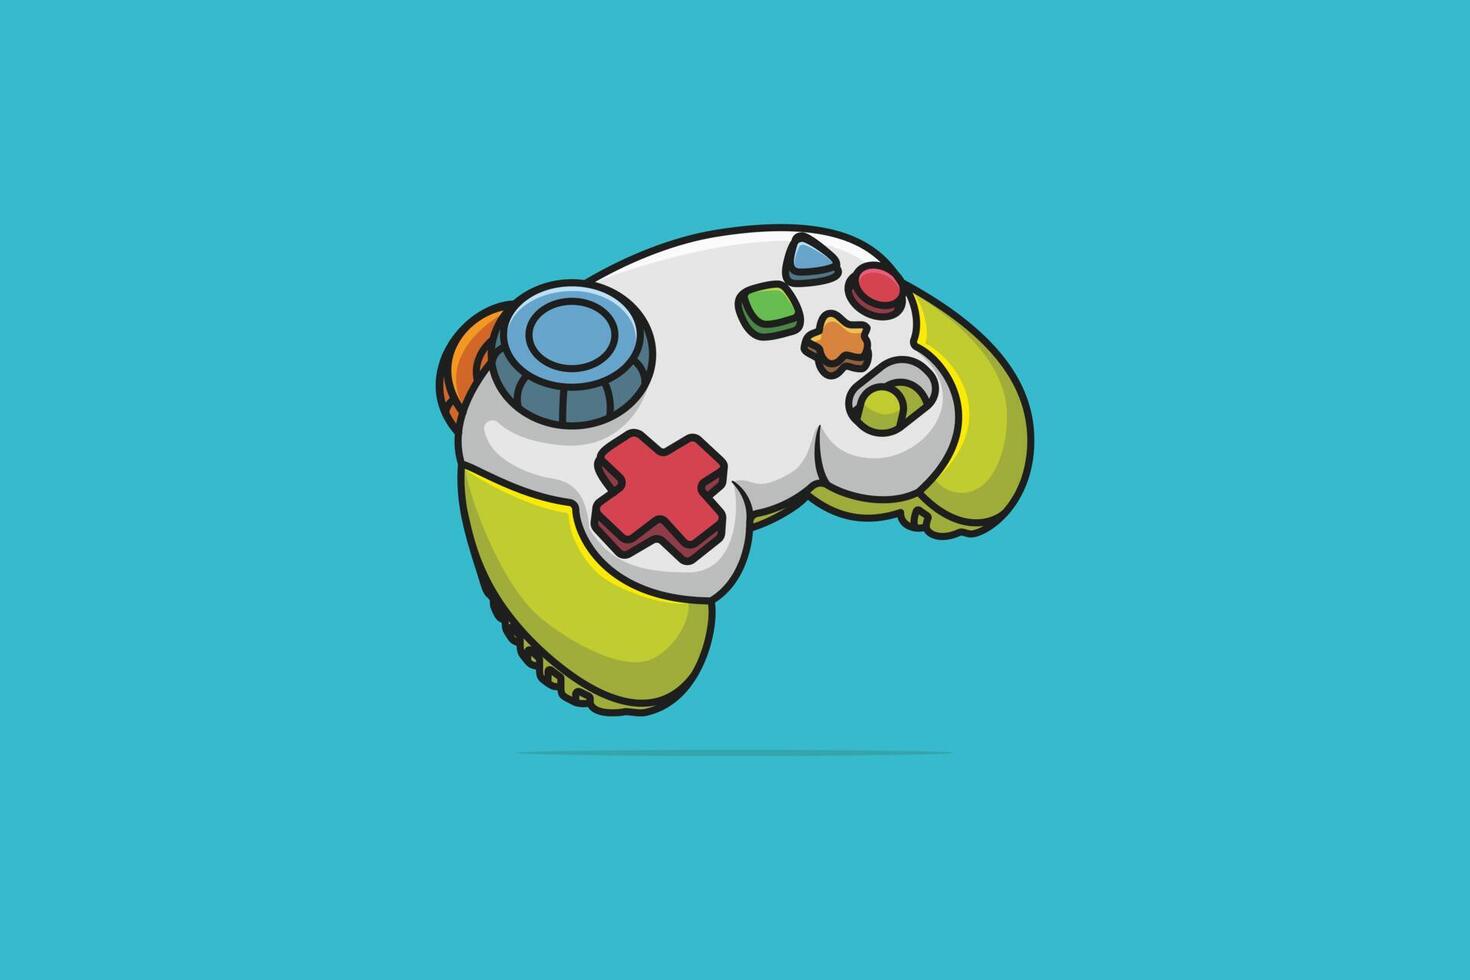 Video Game Controller vector illustration. Sports gaming objects icon concept. Joystick gamepad game console or game controller vector design with shadow on blue background.